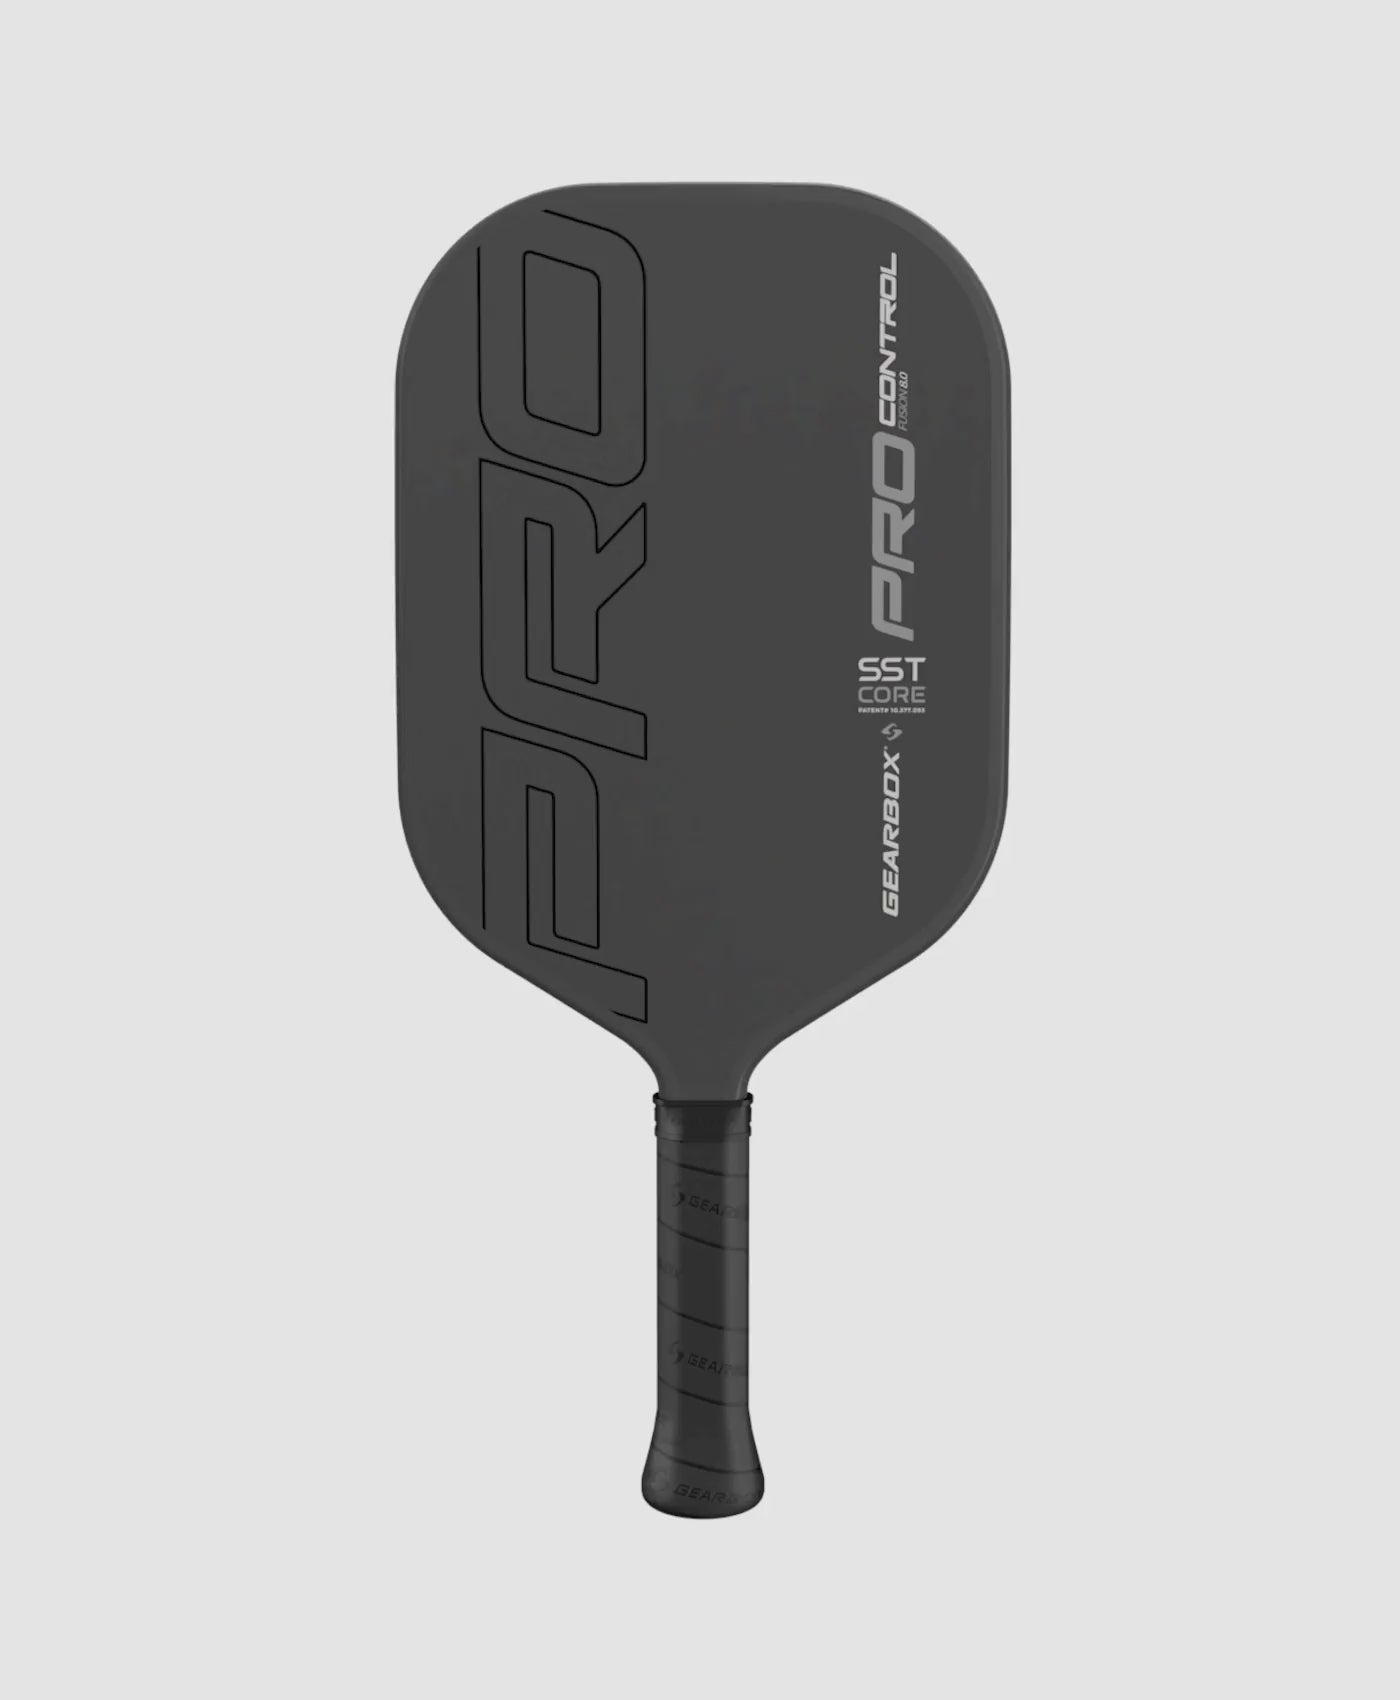 A Gearbox Pro Control Fusion Pickleball Paddle with the word pro on it, featuring Solid Span Technology (SST) from the Gearbox Pro Series.